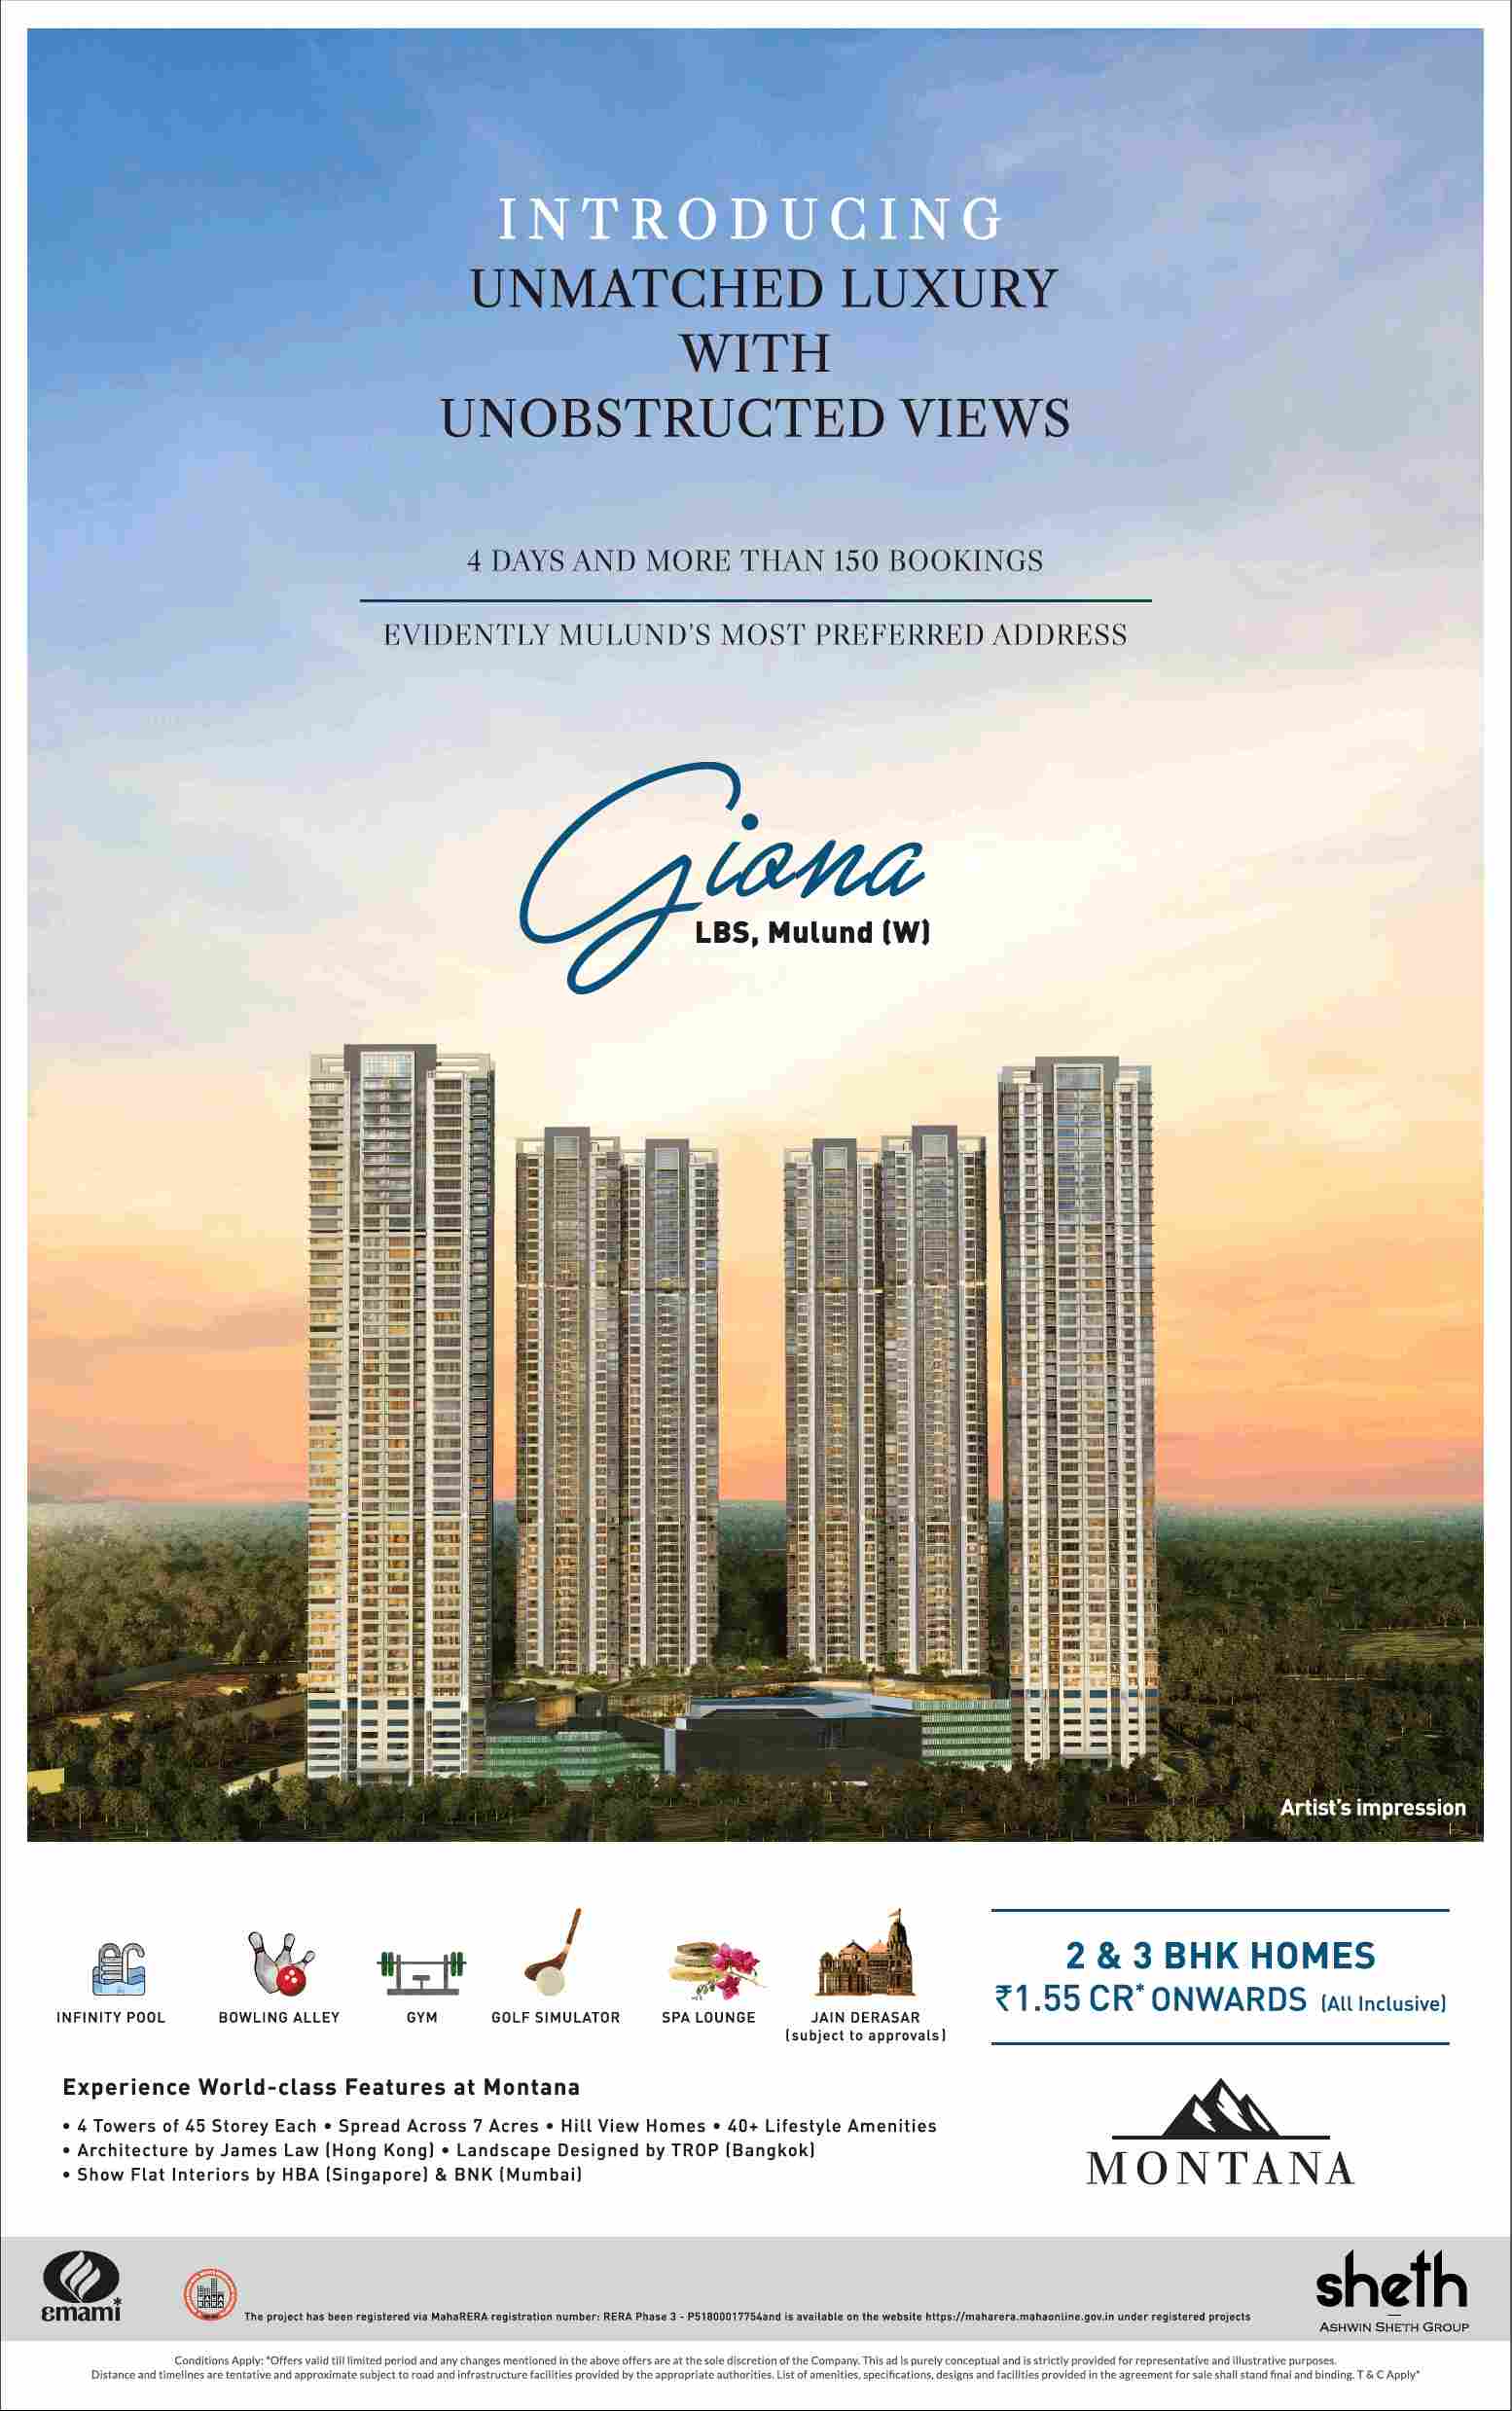 Introducing unmatched luxury with unobstructed views at Sheth Montana in Mumbai Update